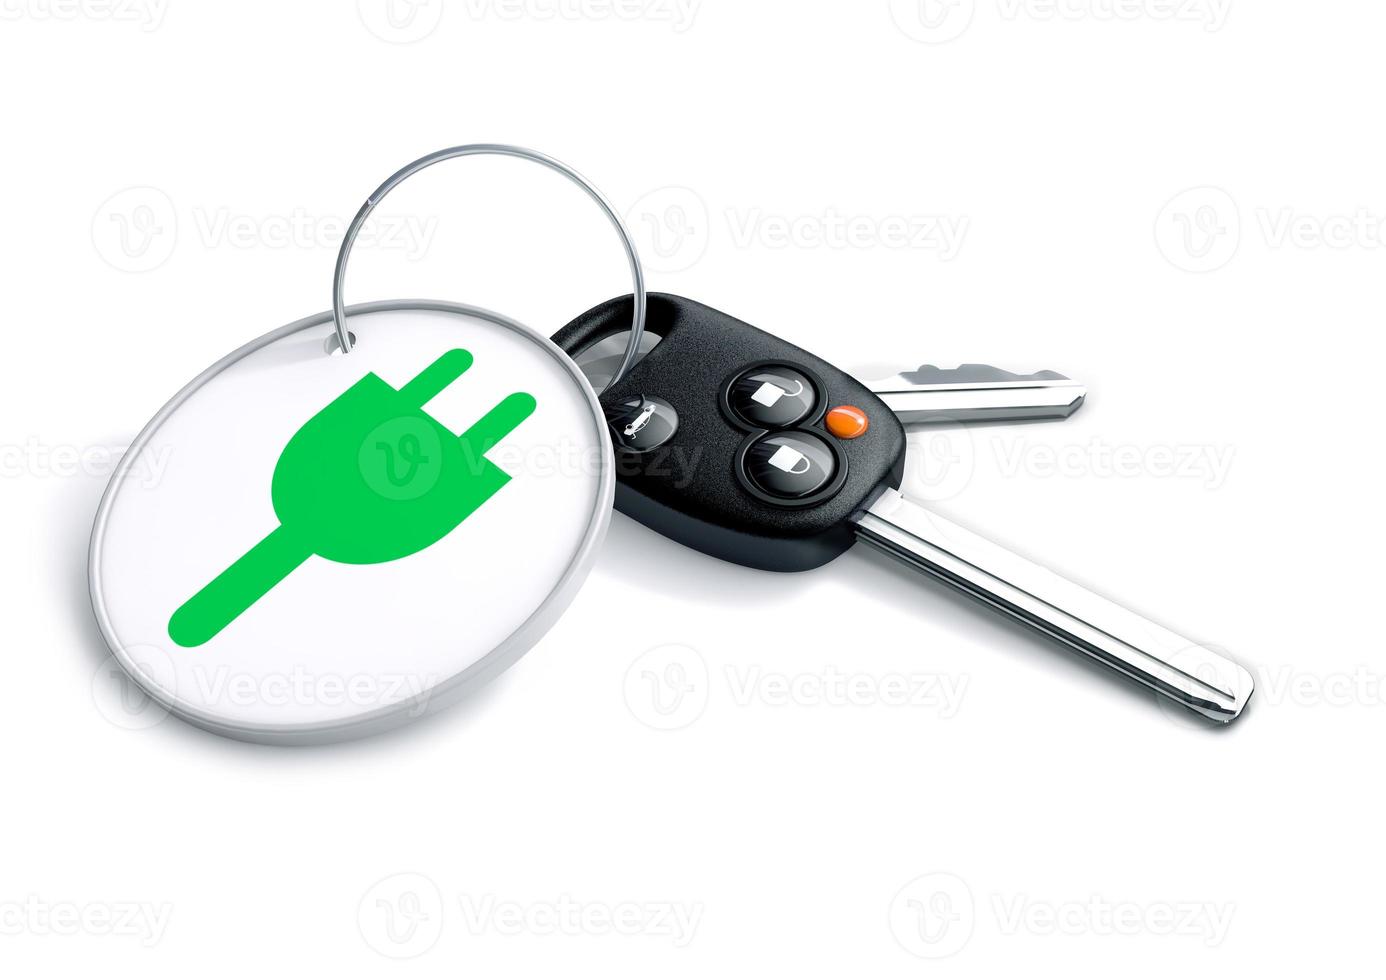 Set of car keys with keyring and electric power icon on it. Zero emmisions and green vehicles. Concept for converting consumers to using electric powered vehicles and cars in the future. photo